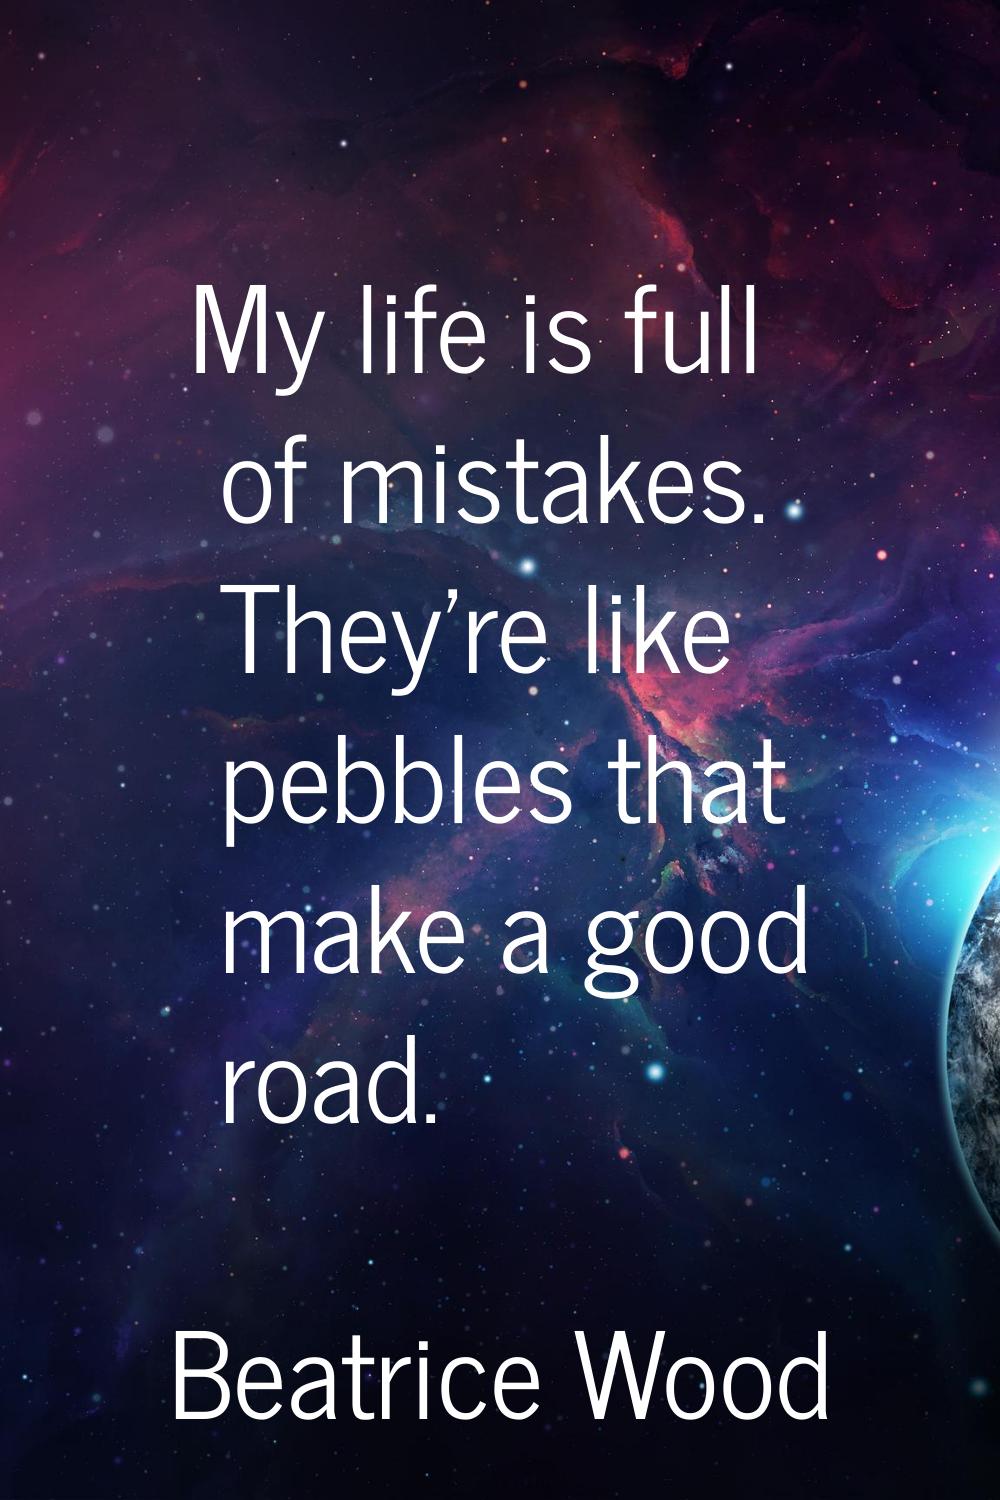 My life is full of mistakes. They're like pebbles that make a good road.